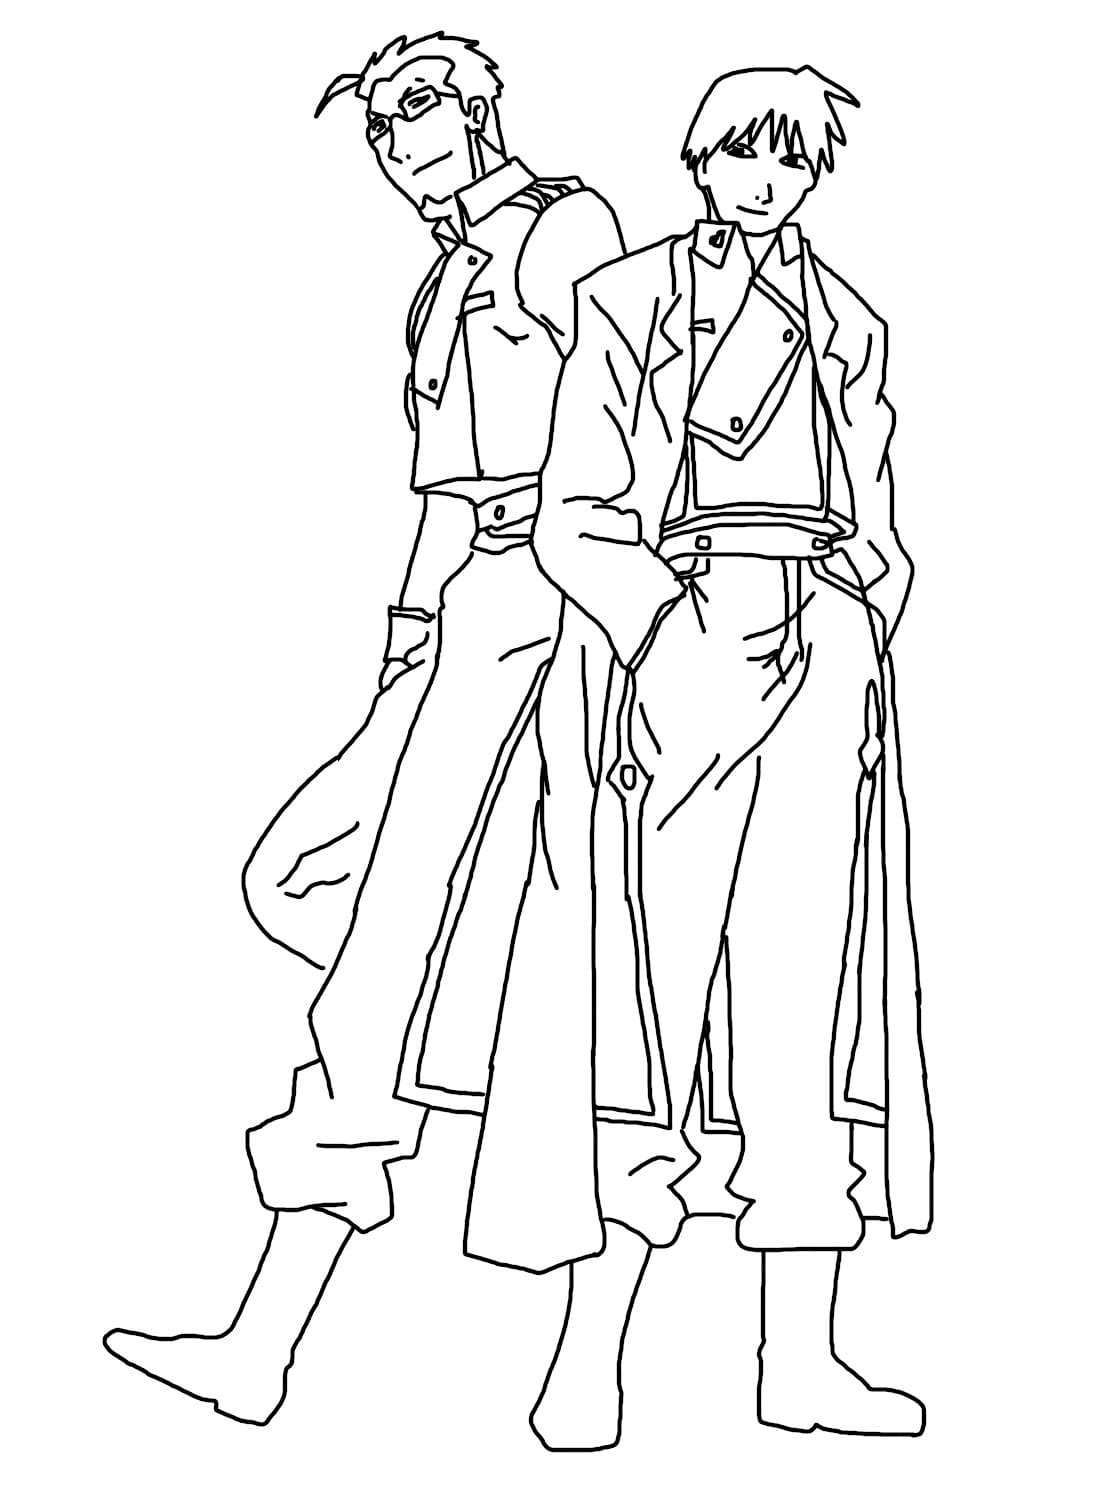 Fullmetal Alchemist Maes Hughes and Roy Mustang